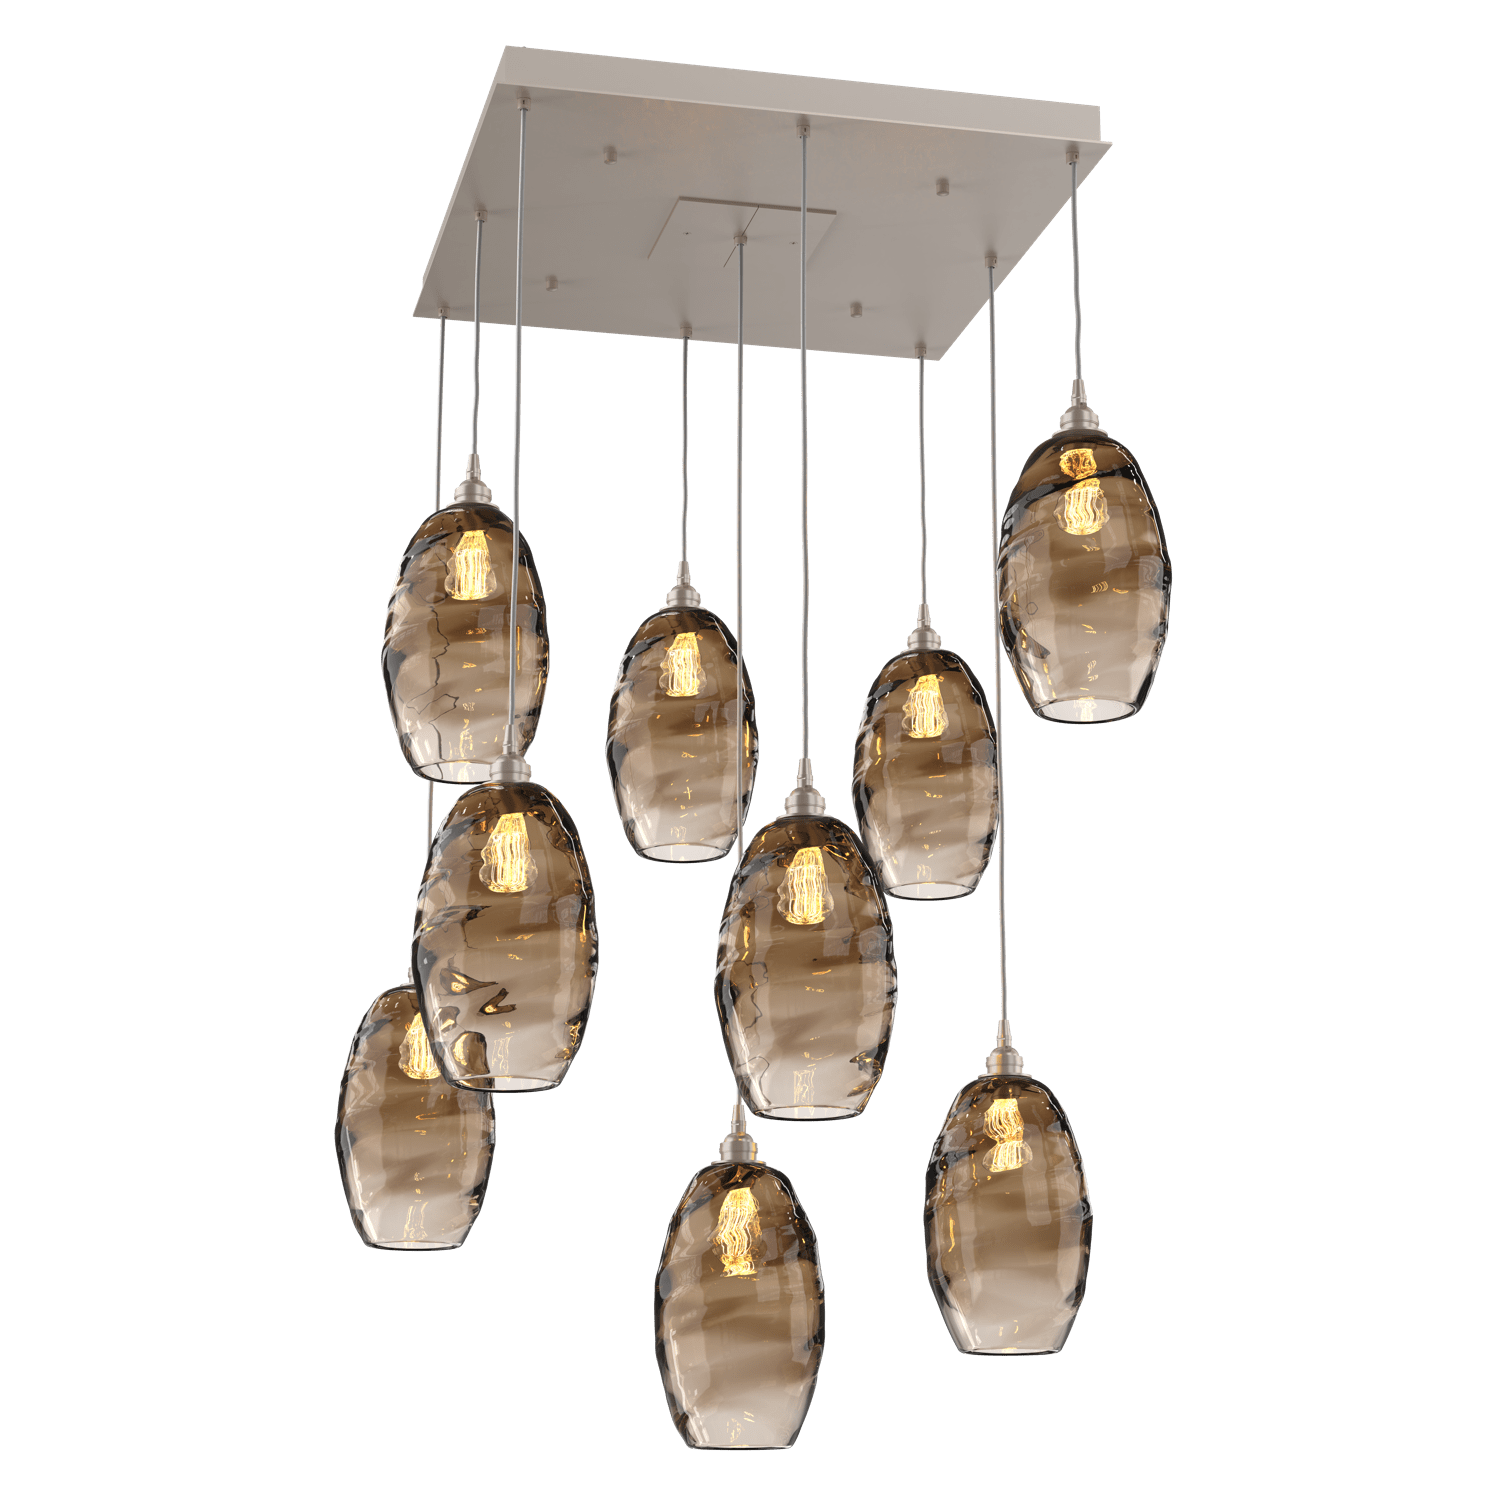 CHB0035-09-BS-OB-Hammerton-Studio-Optic-Blown-Glass-Elisse-9-light-square-pendant-chandelier-with-metallic-beige-silver-finish-and-optic-bronze-blown-glass-shades-and-incandescent-lamping